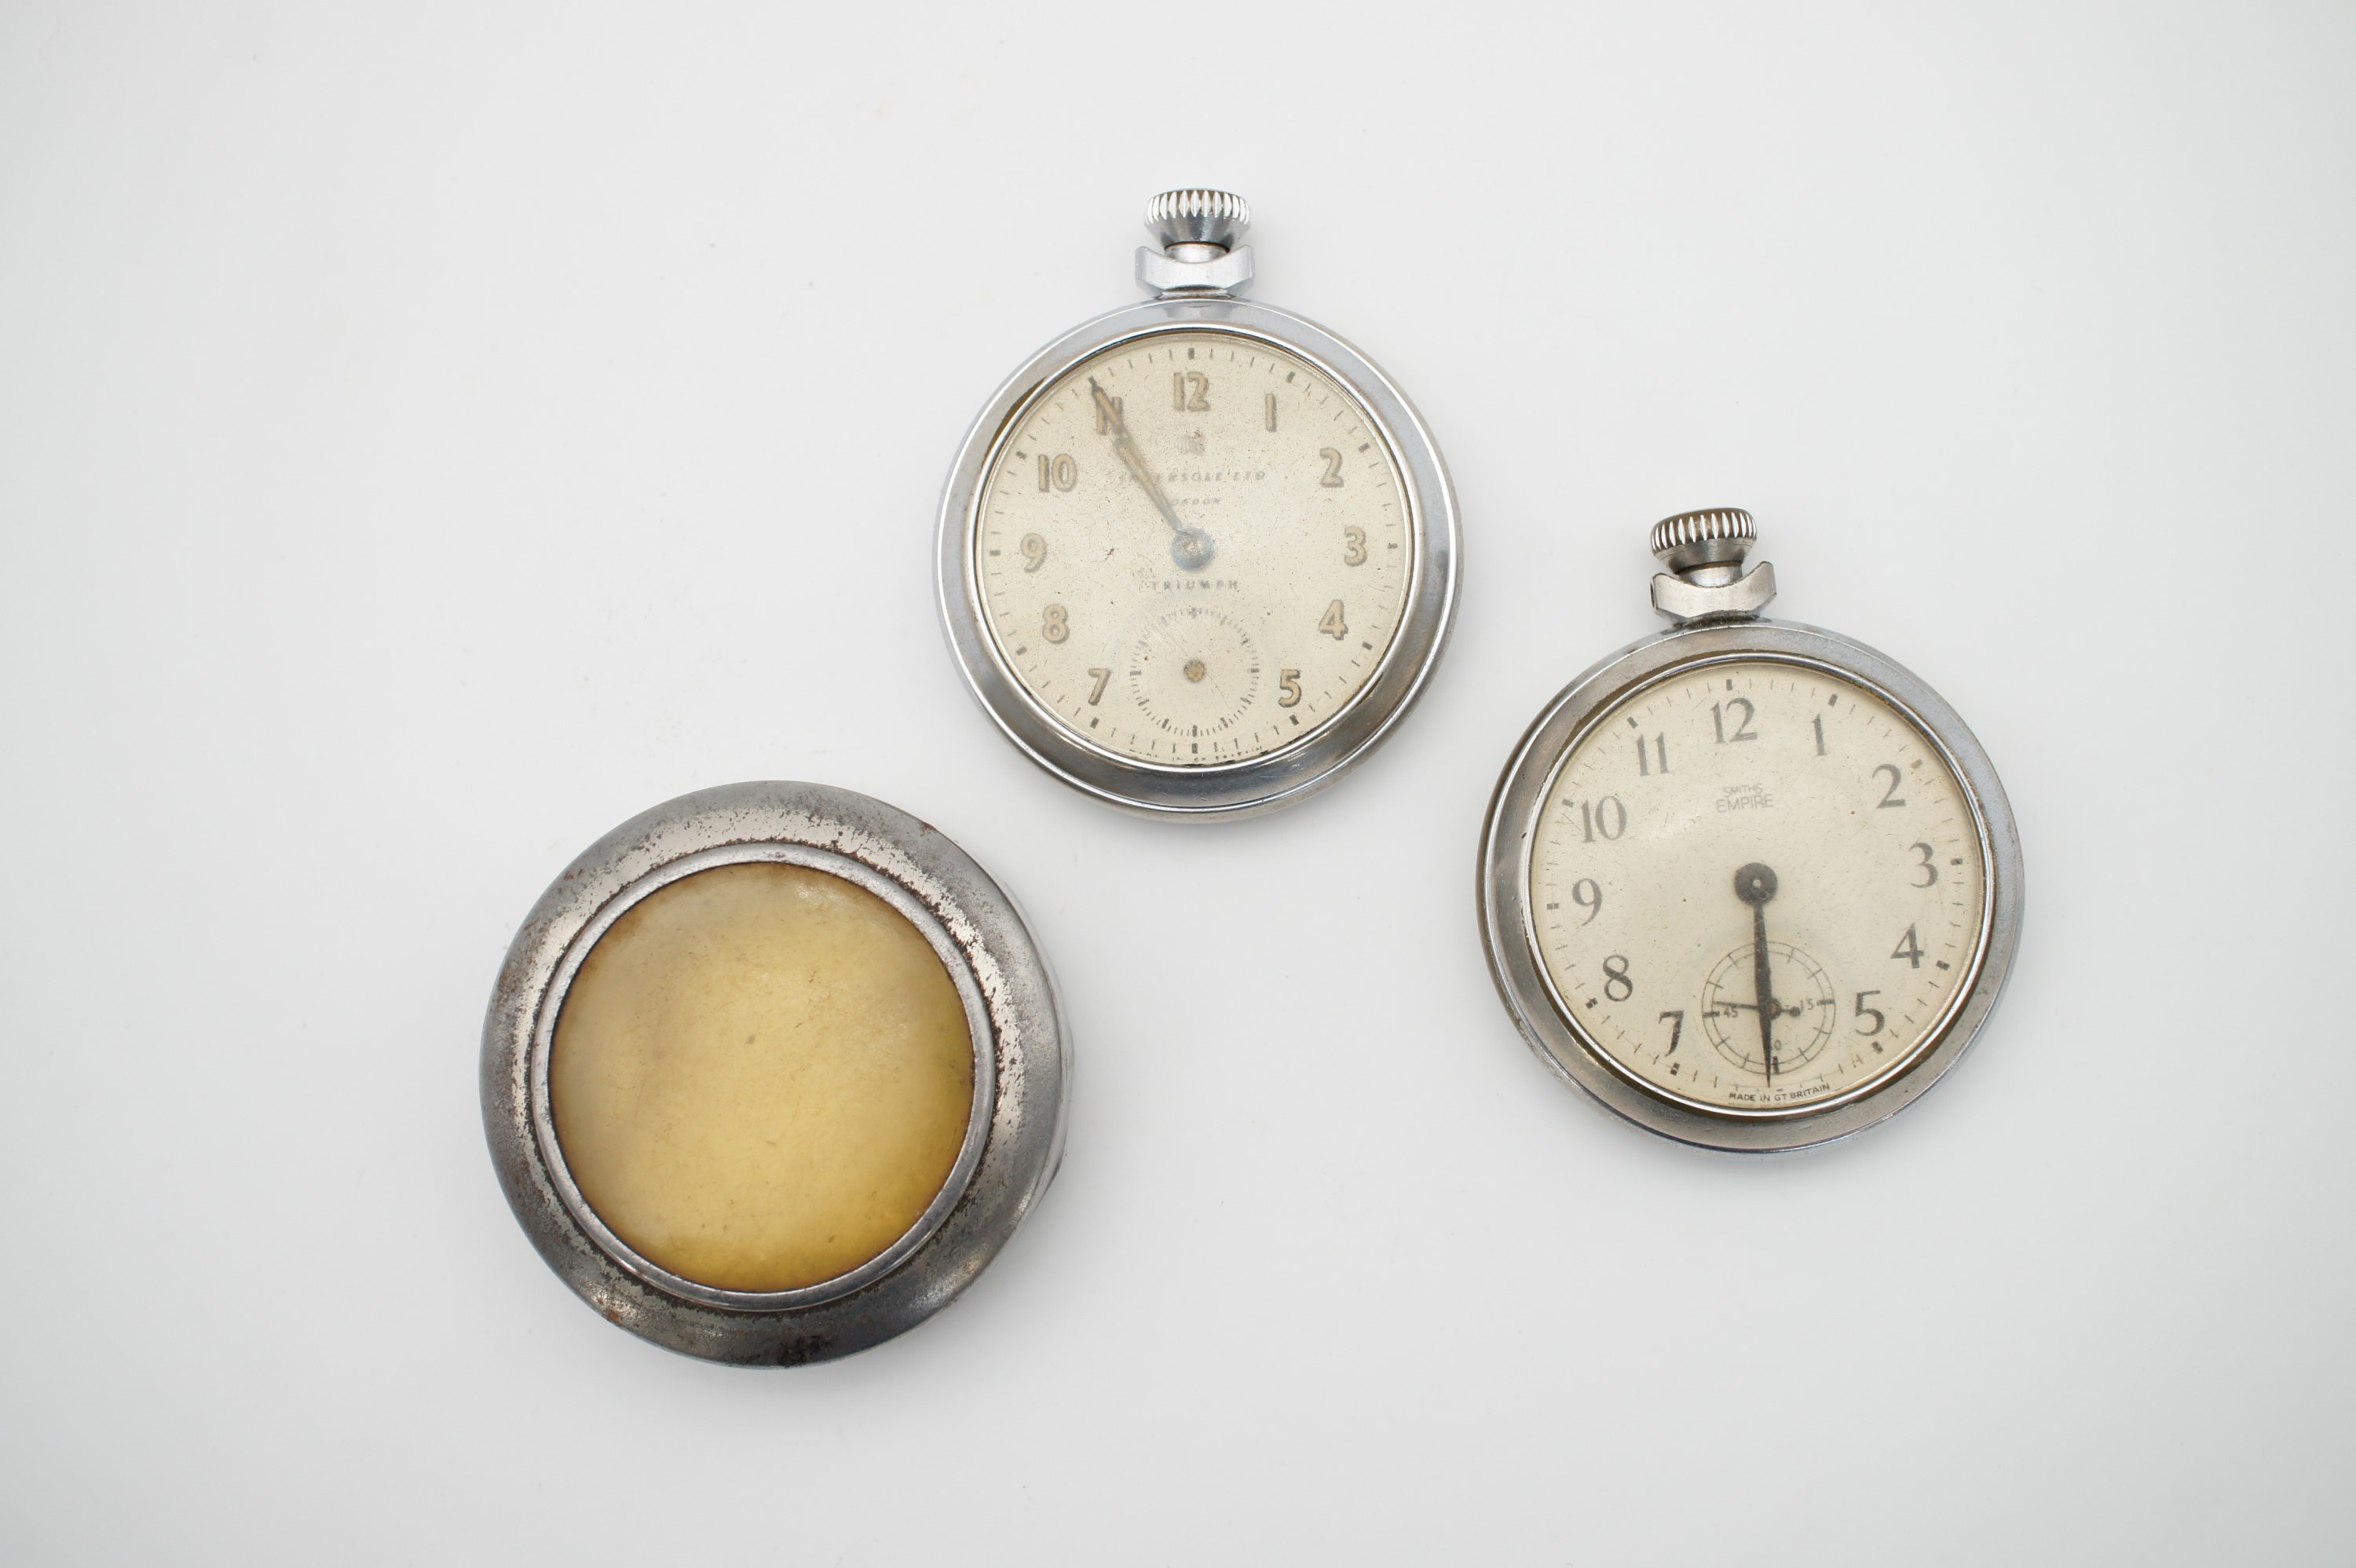 Two 20th Century rhodium plated pocket watches, including an Ingersoll "Triumph" and Smiths "